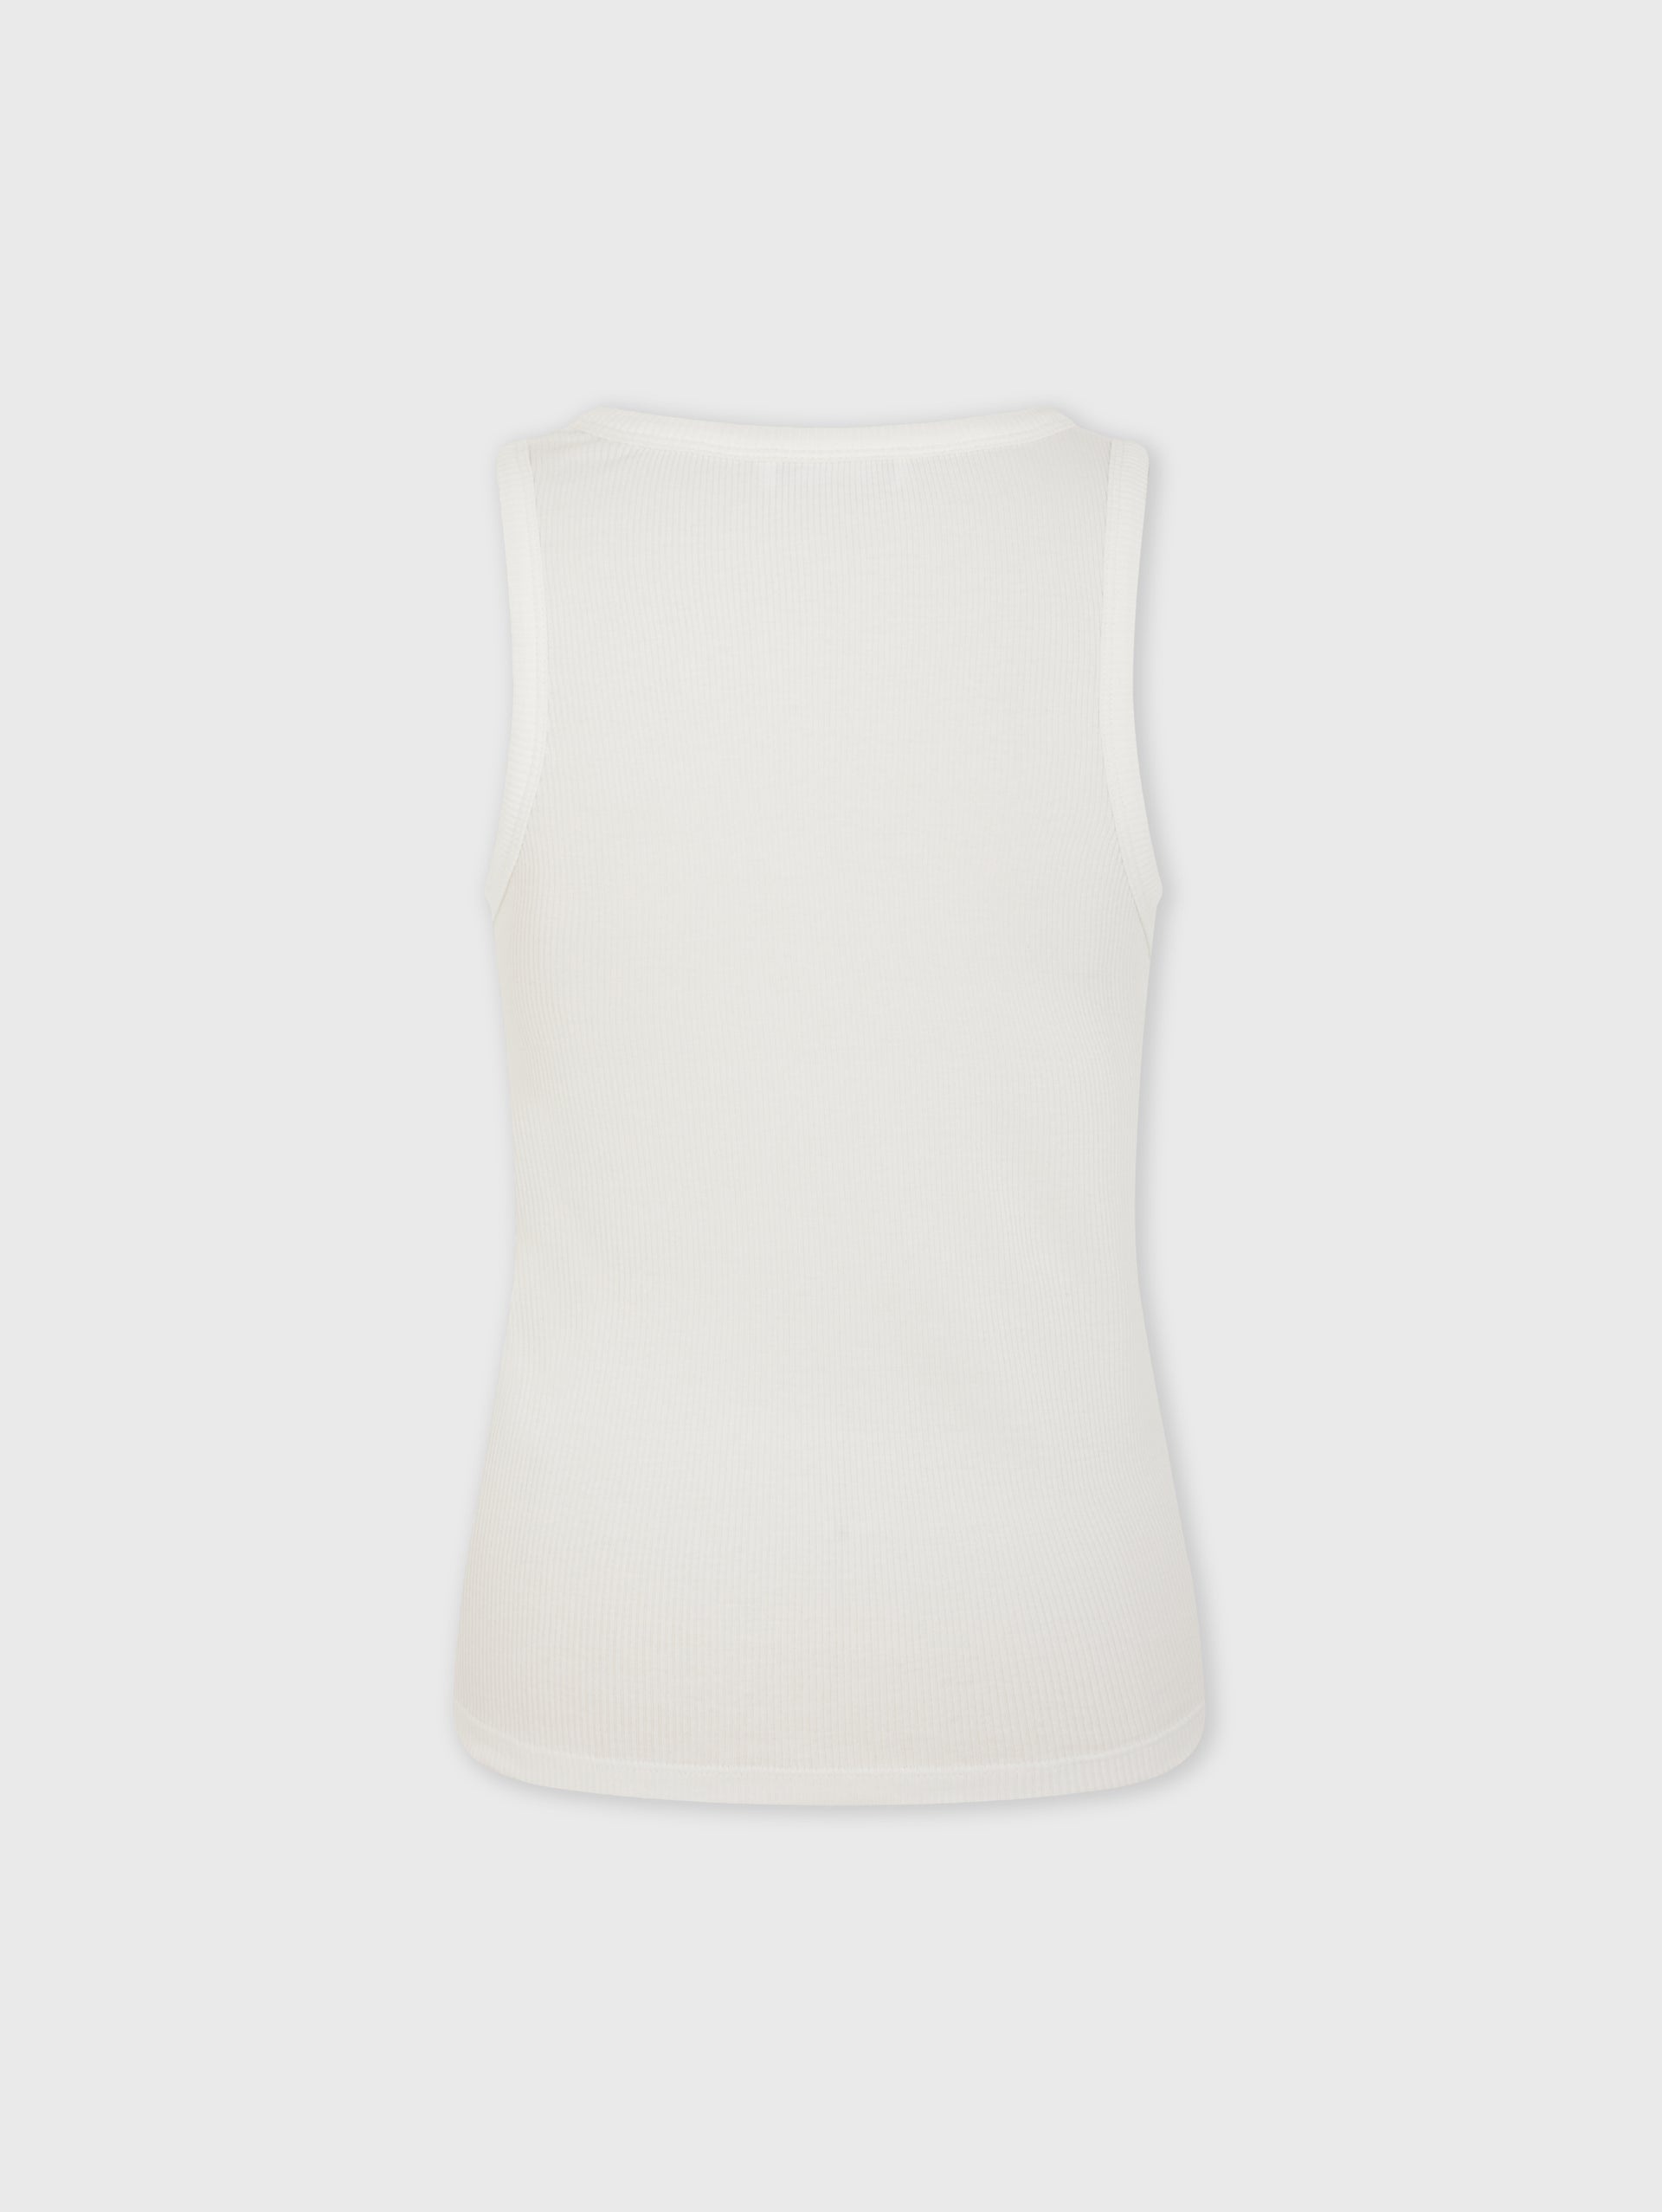 WHITE TANK TOP WITH SIGNATURE PIERCING - 4